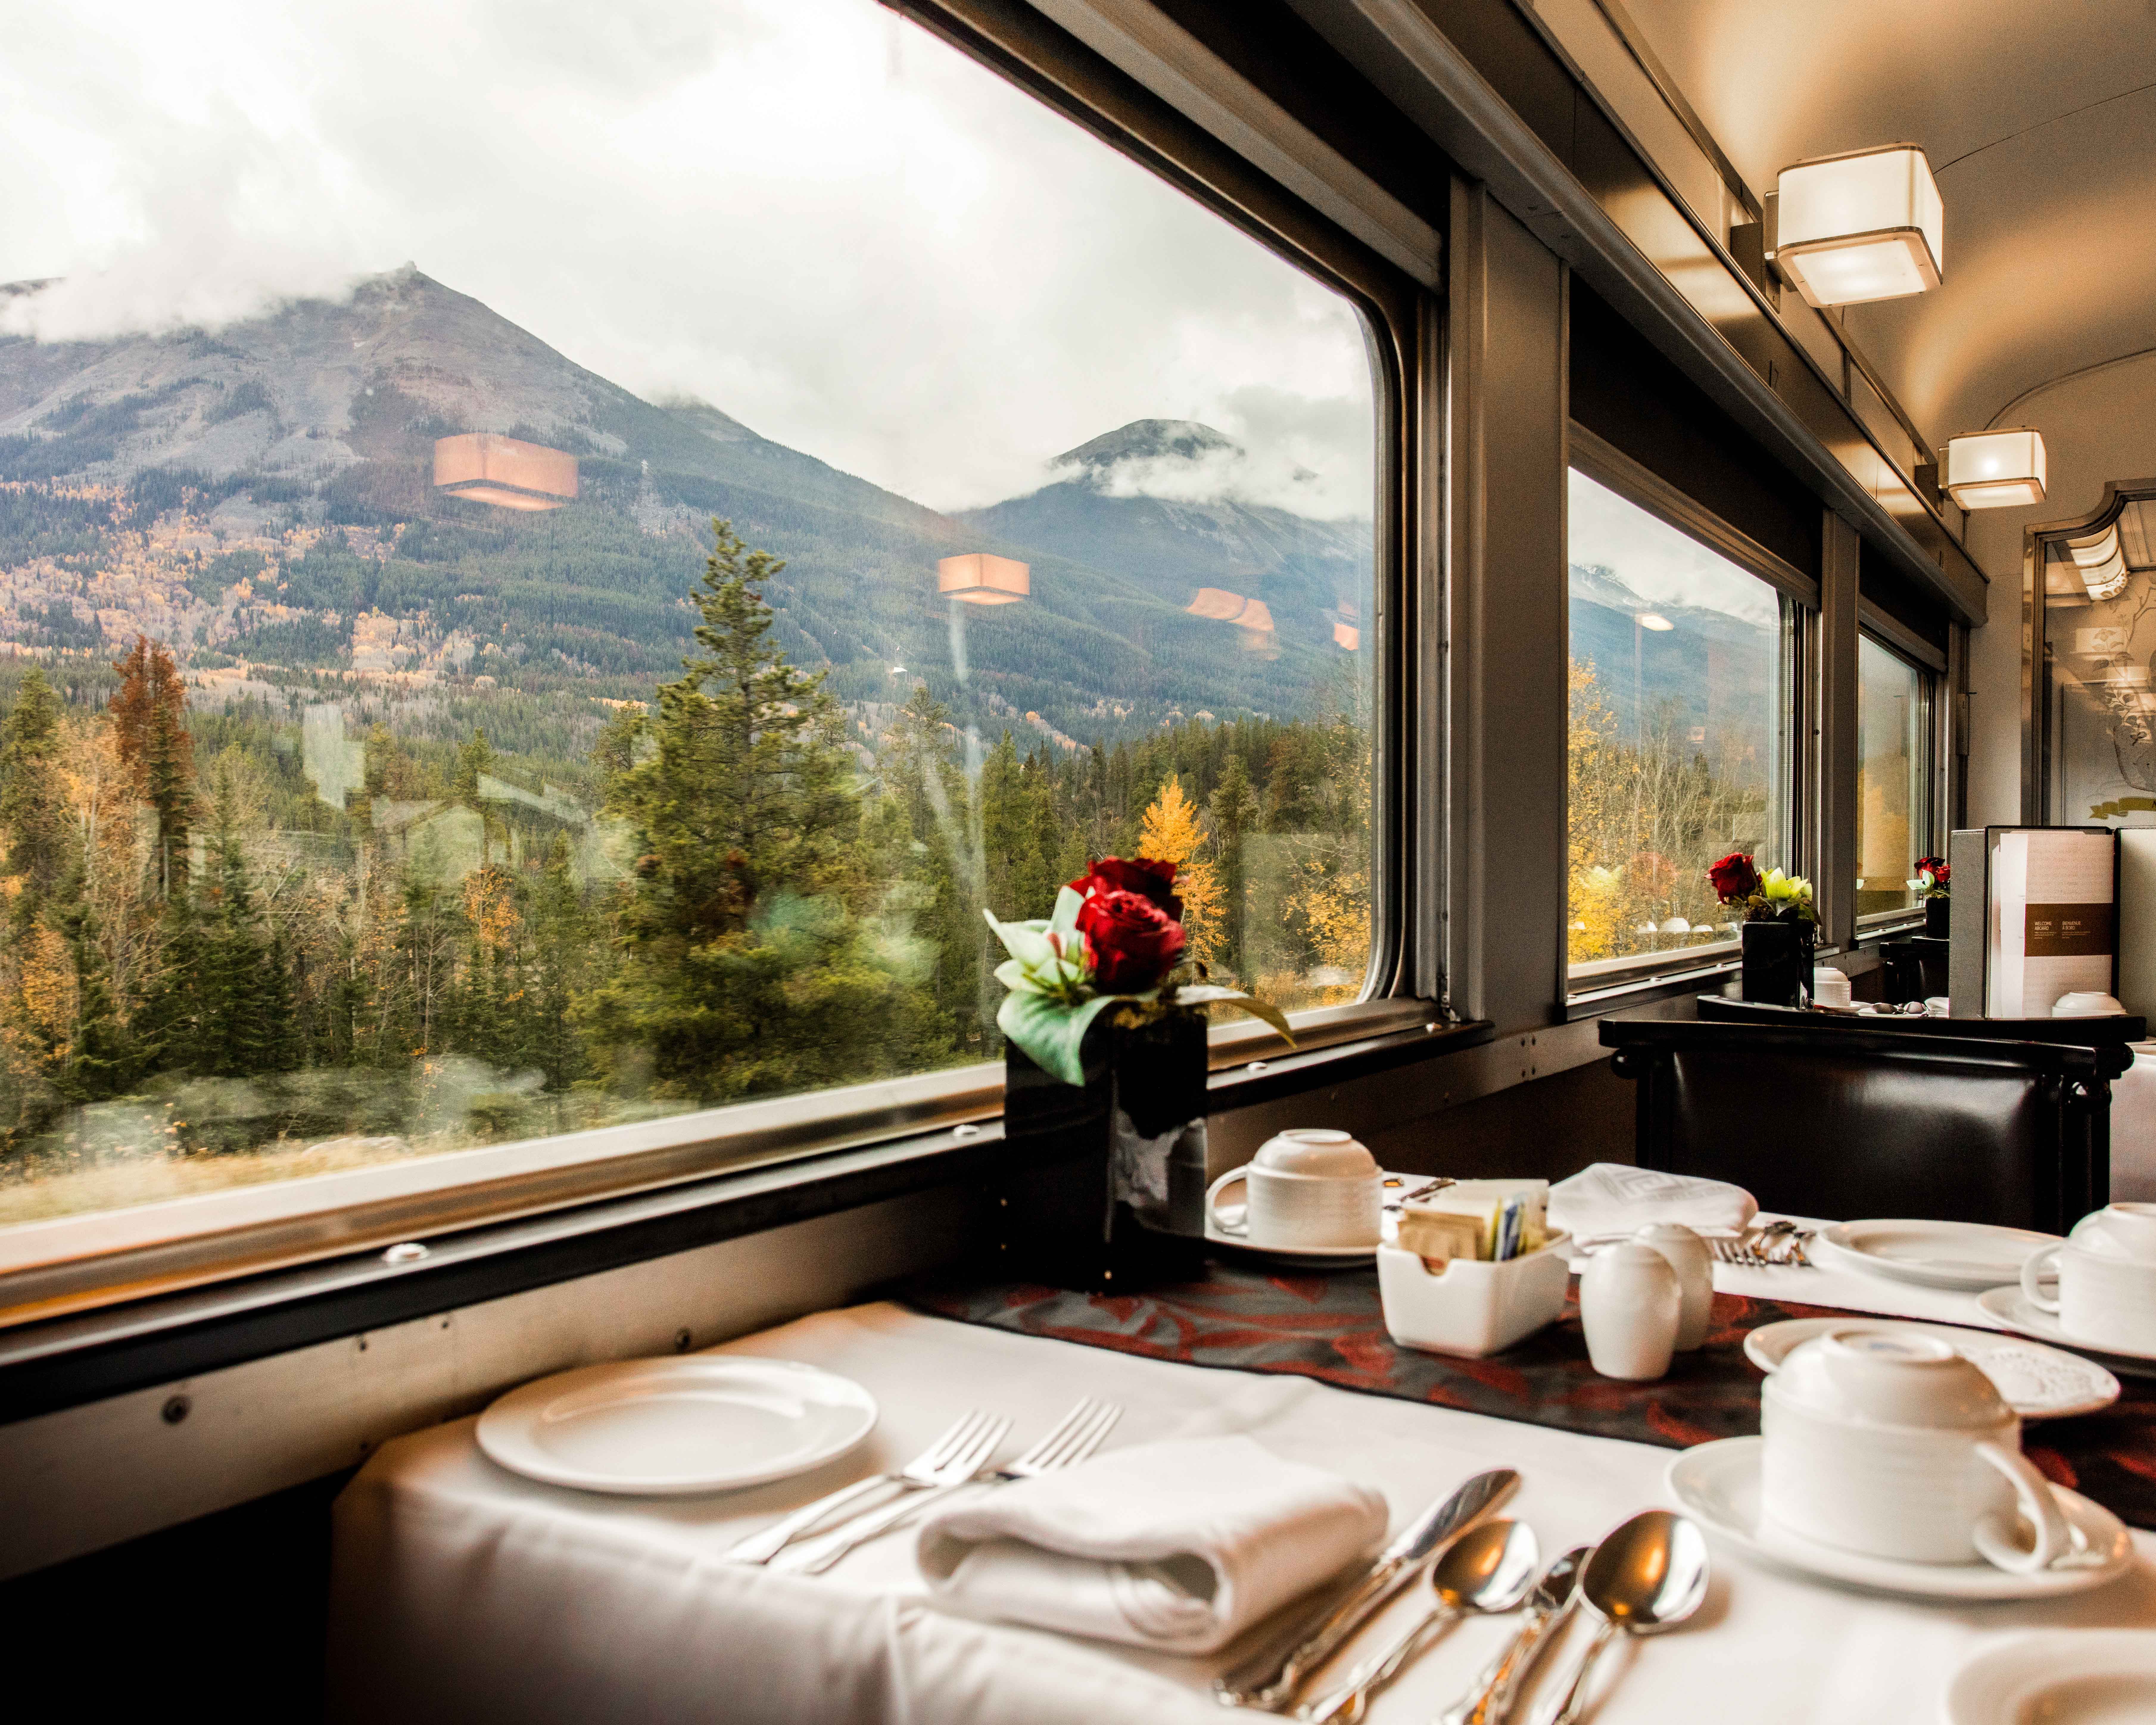 High-end train travel: dinner laid out for two.